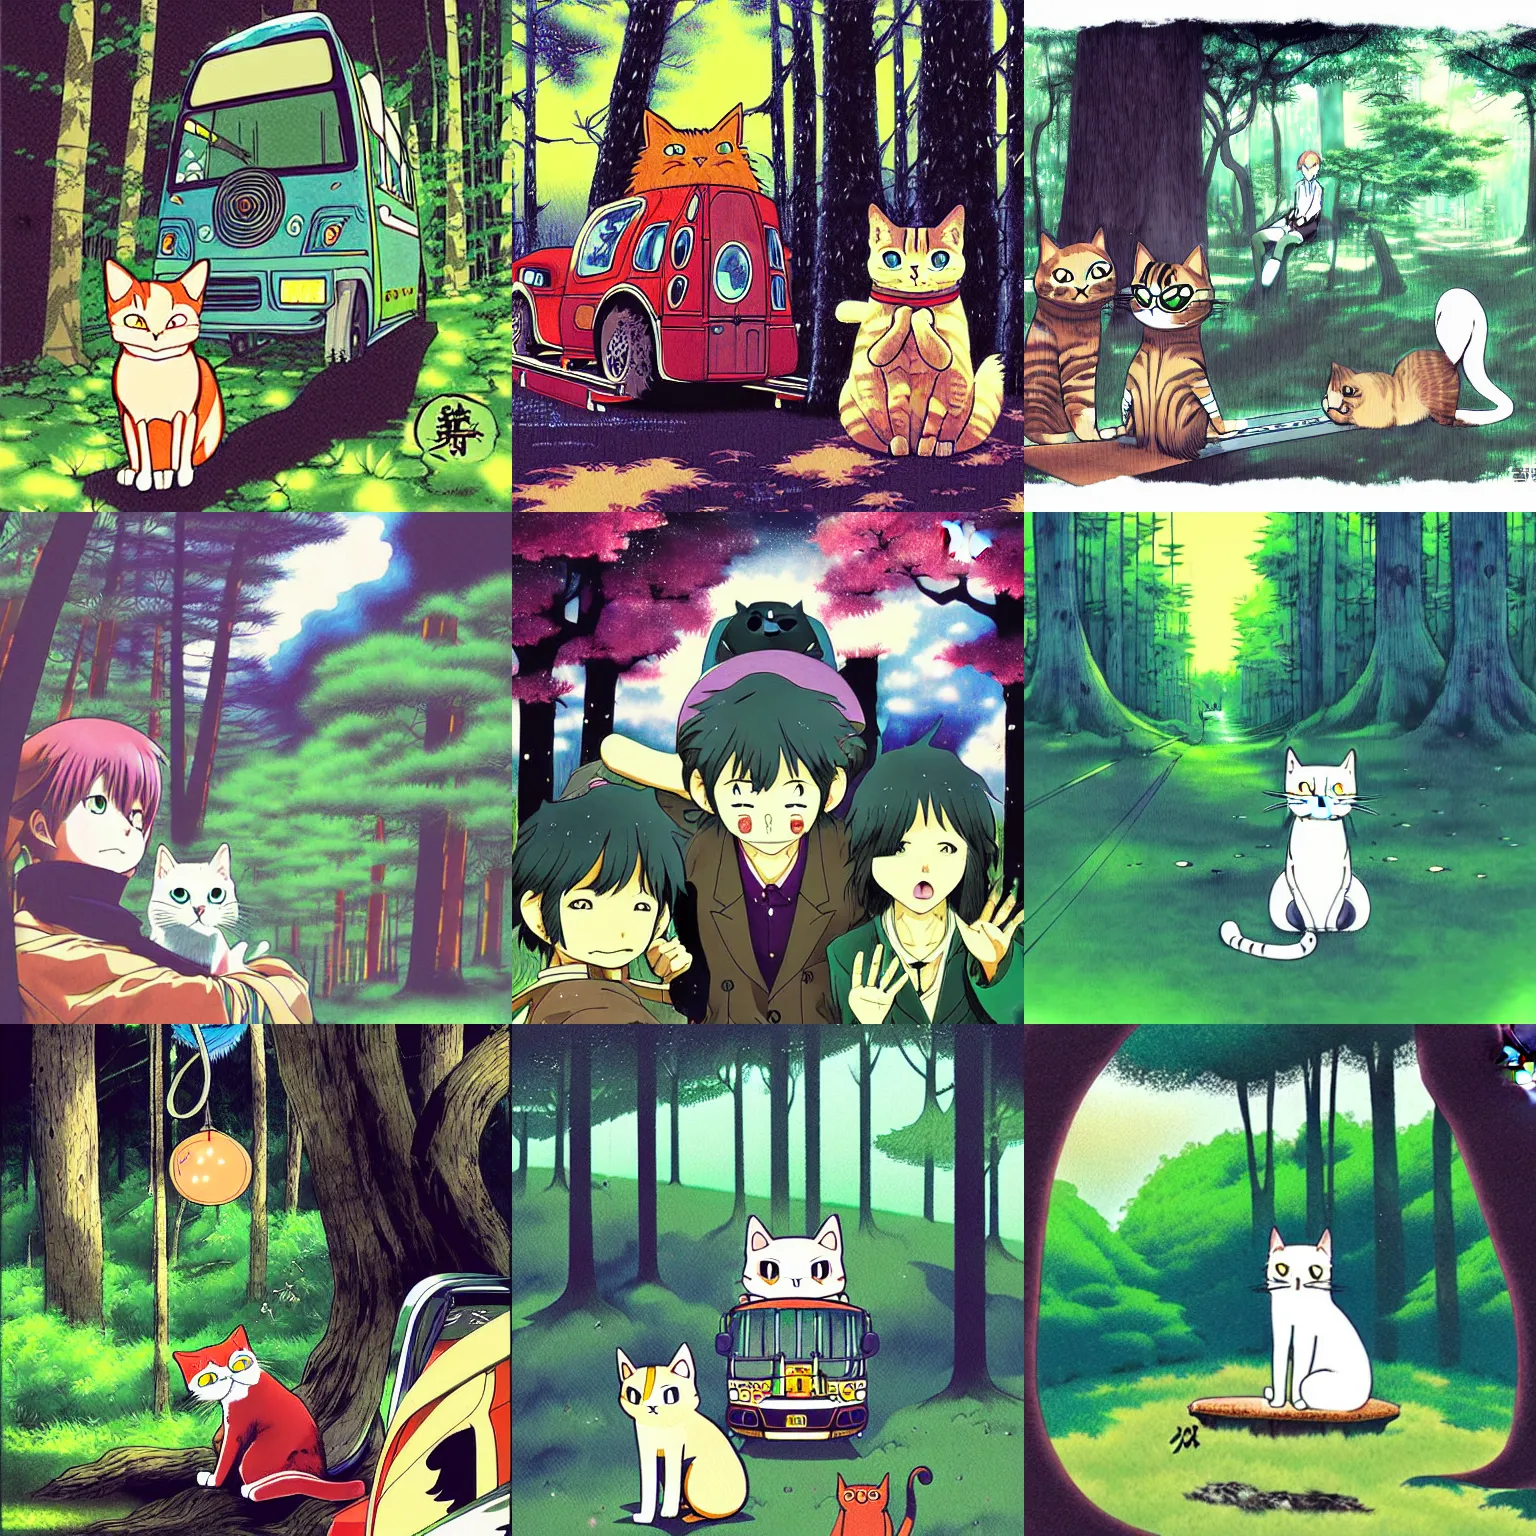 Prompt: digital illustration anime cat as bus in the forest, by miazaki, by leiji matsumoto